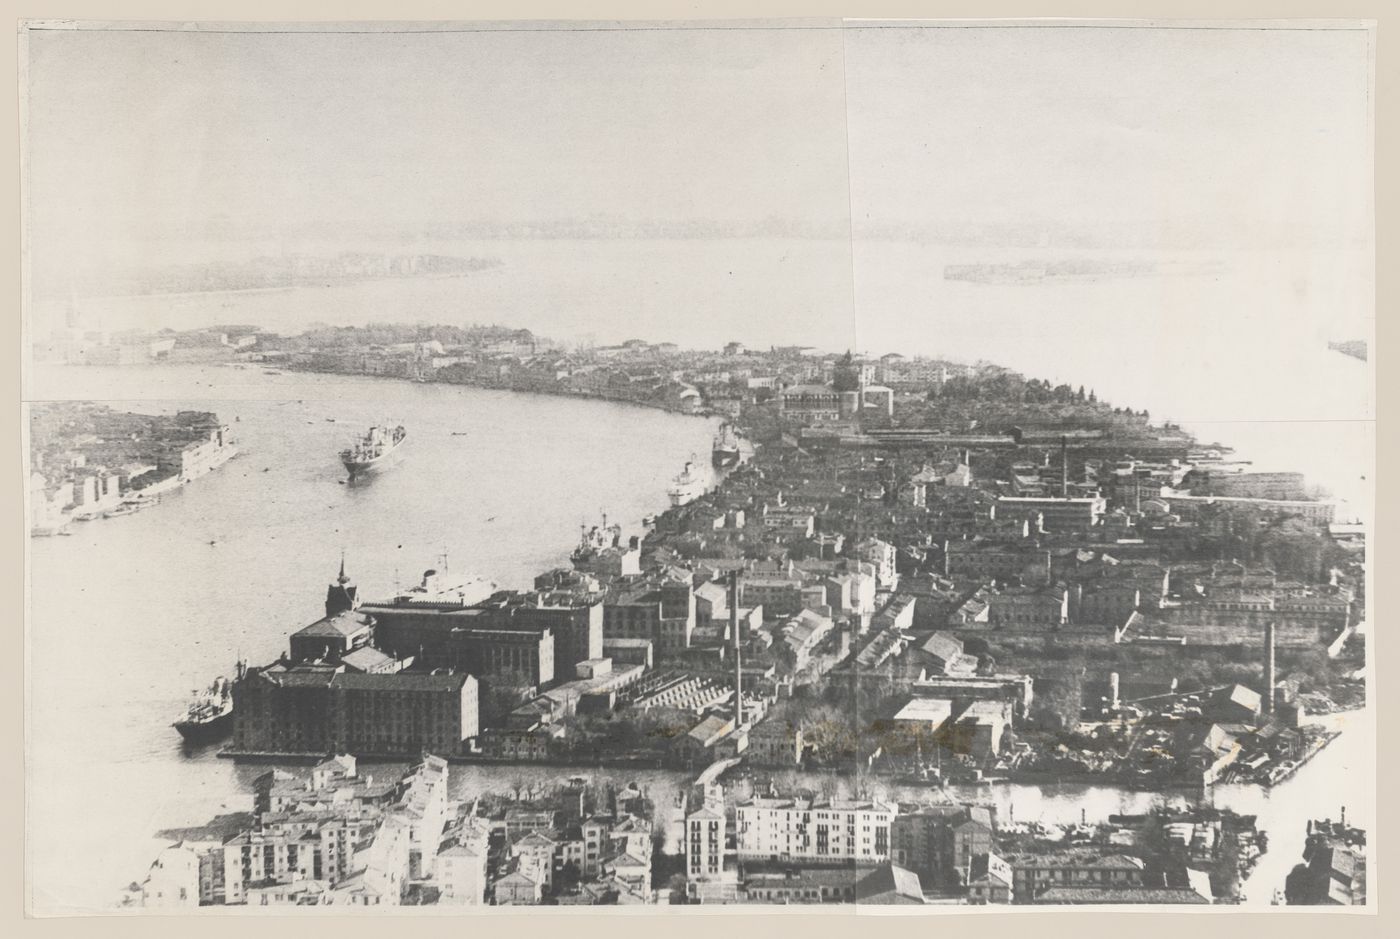 Aerial view of Venice, Italy (from the project file "Cemetery for the Ashes of Thought")